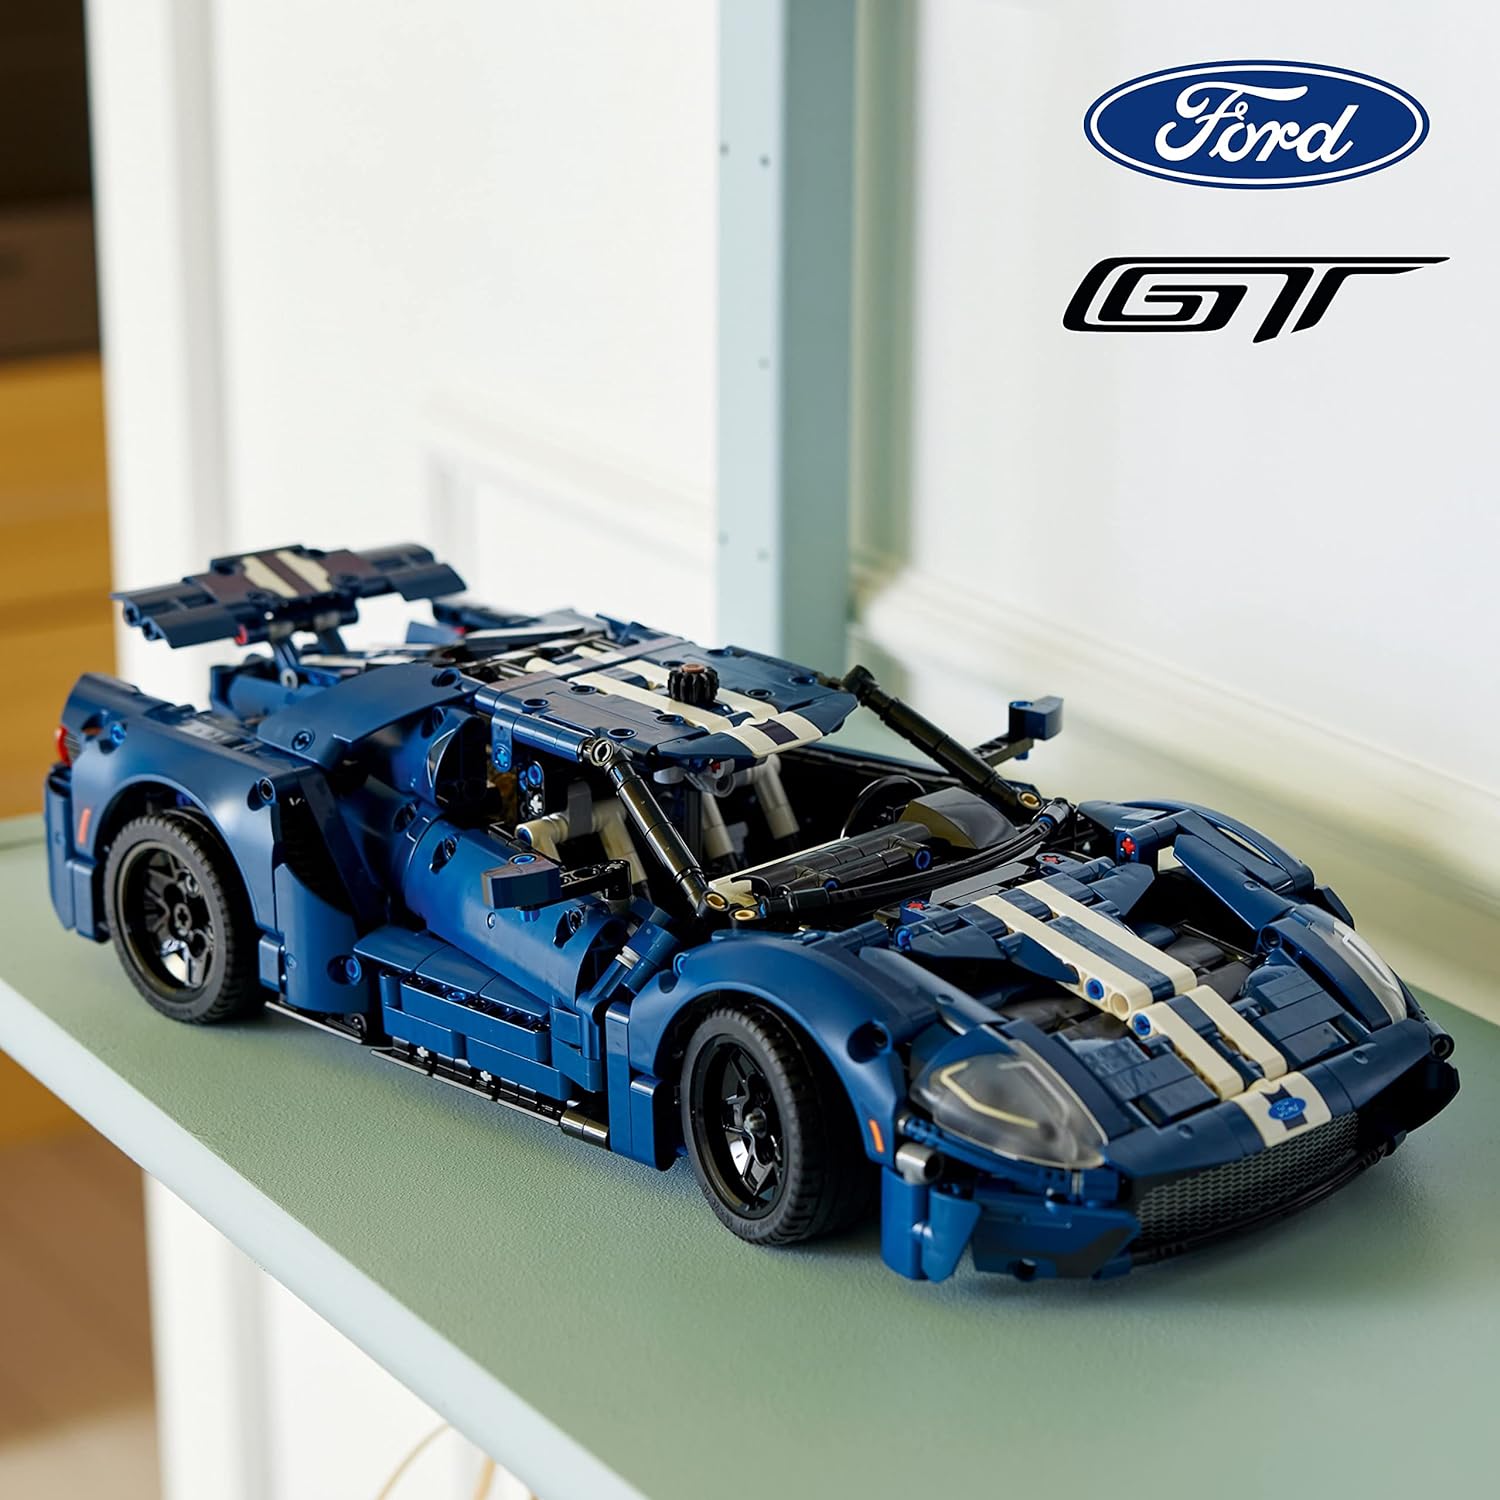 LEGO 42154 Technic Ford GT Car Model Kit for Adults to Build, Collectible Set, 1:12 Scale Supercar with Authentic Features, Gift Idea That Fuels Creativity and Imagination